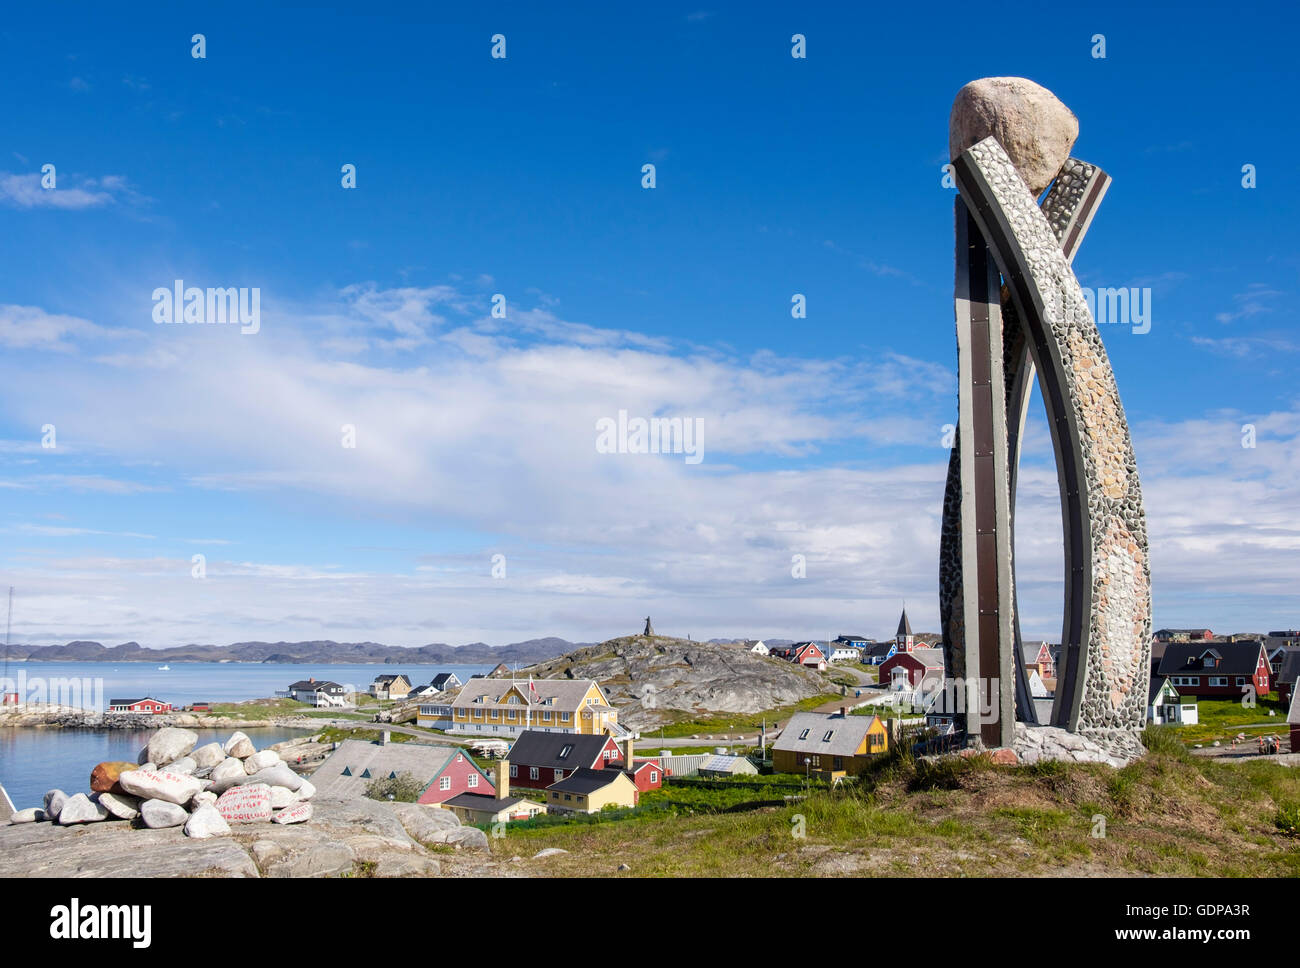 Inussuk sculpture by Niels Motfeldt overlooking the old town and marking start of Self Governance. Nuuk Greenland Stock Photo